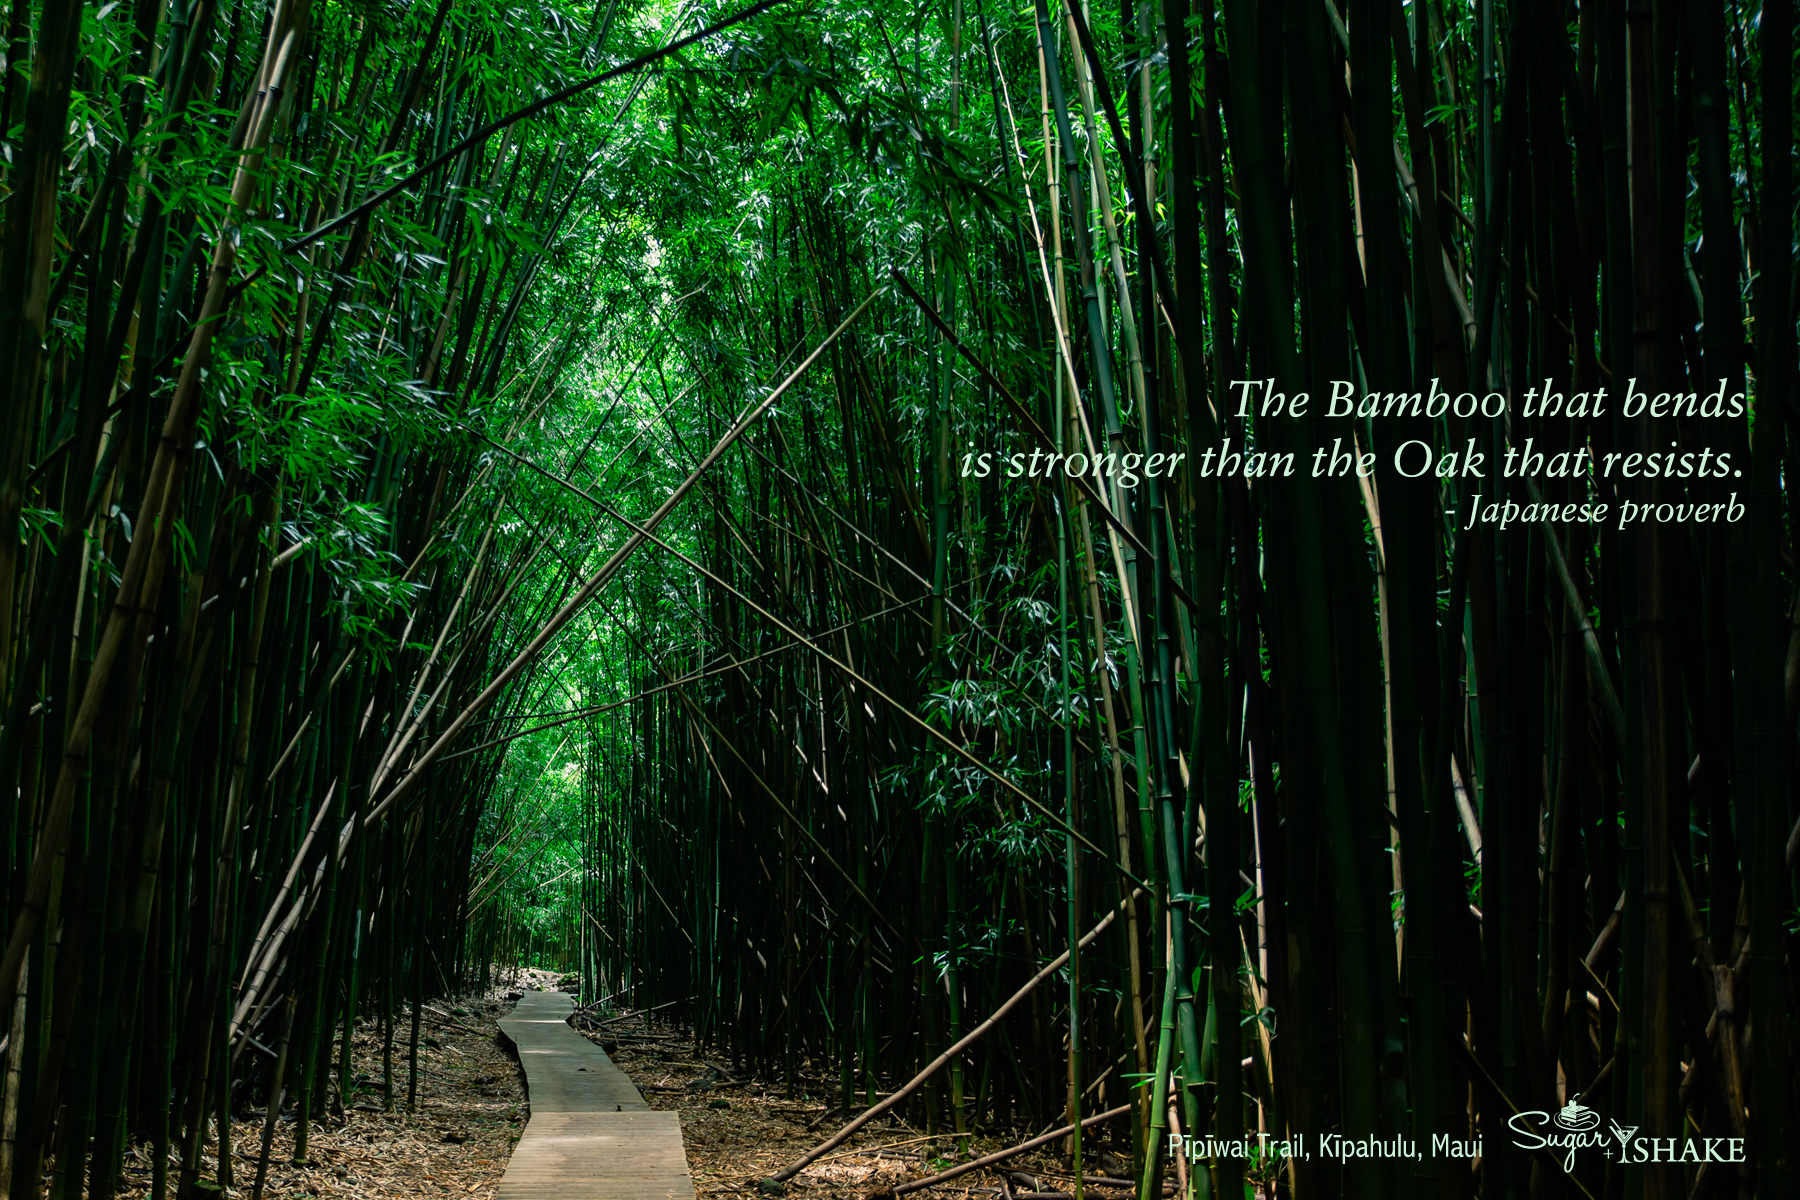 “The Bamboo that bends is stronger than the Oak that resists.” (Japanese proverb) Pīpīwai Trail, Kīpahulu, Maui. © 2015 Sugar + Shake